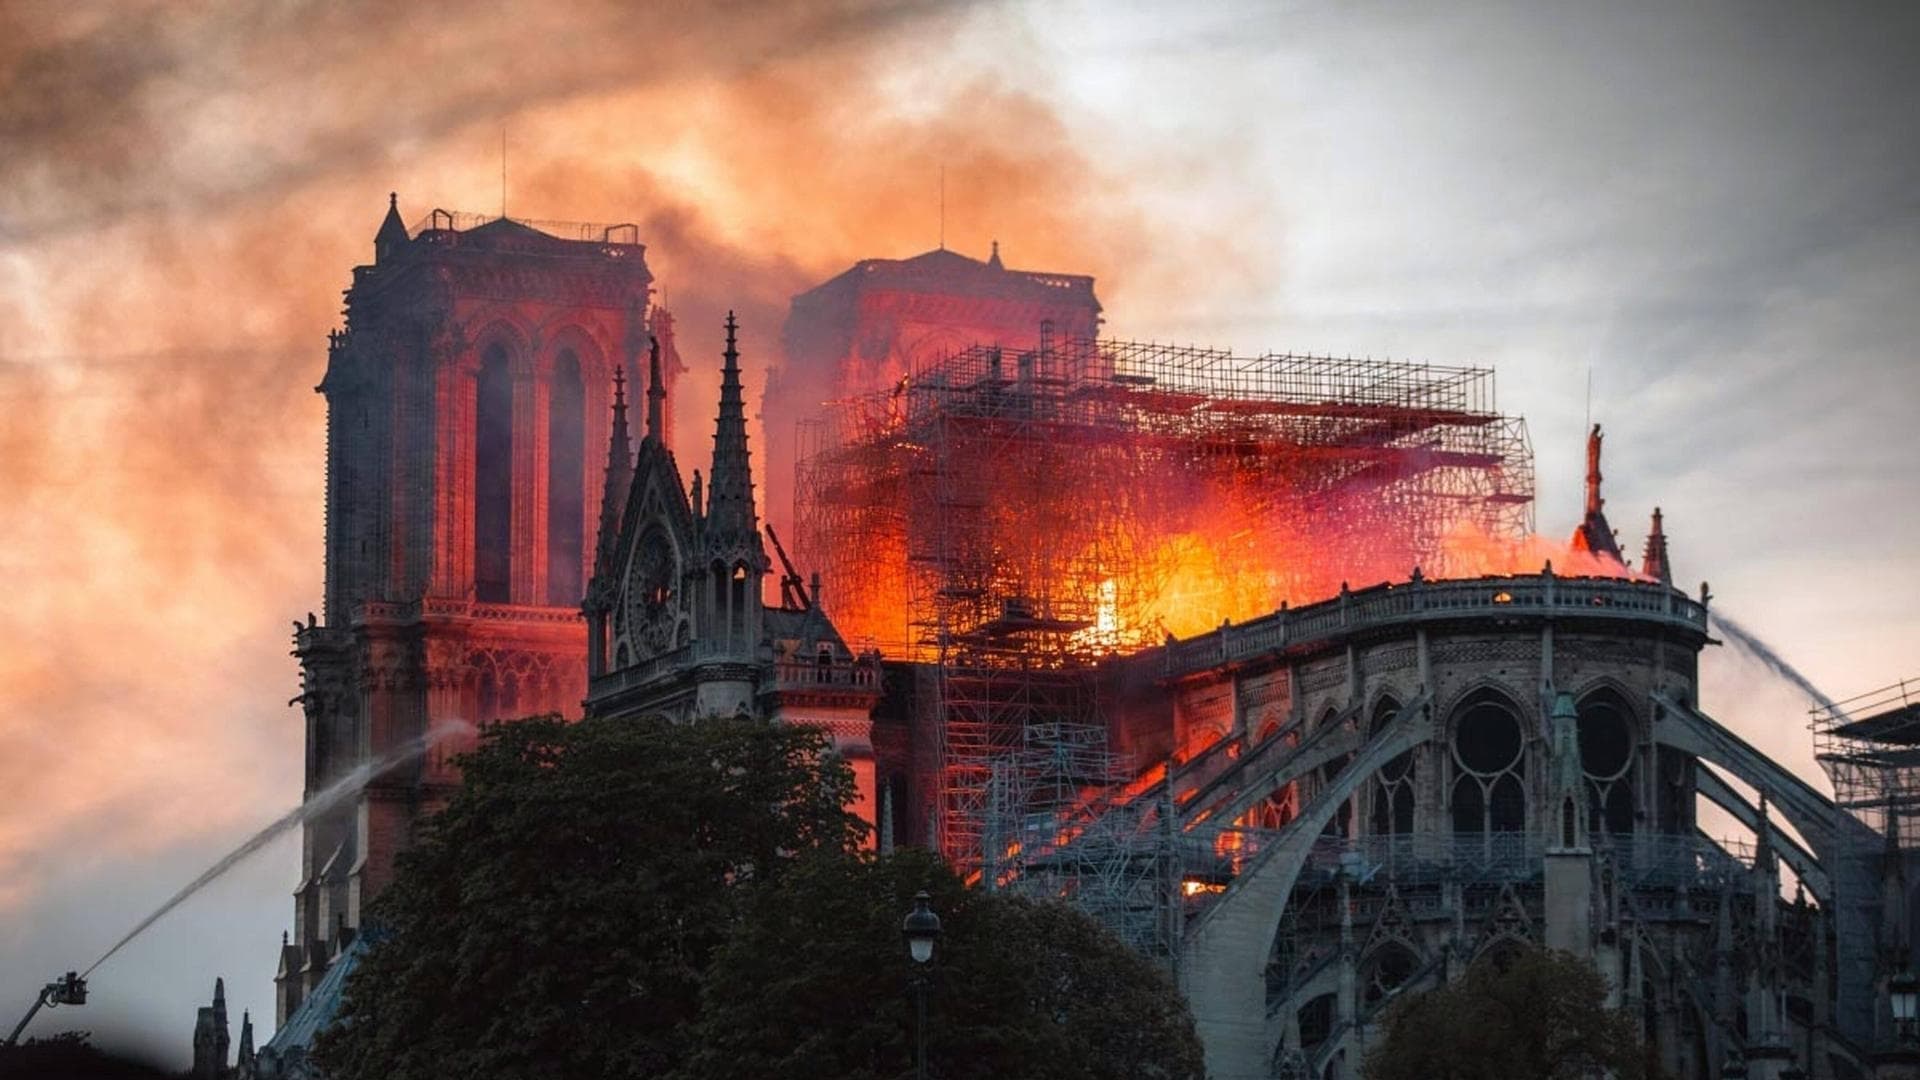 Poster Phim Notre-Dame on Fire (Notre-Dame on Fire)